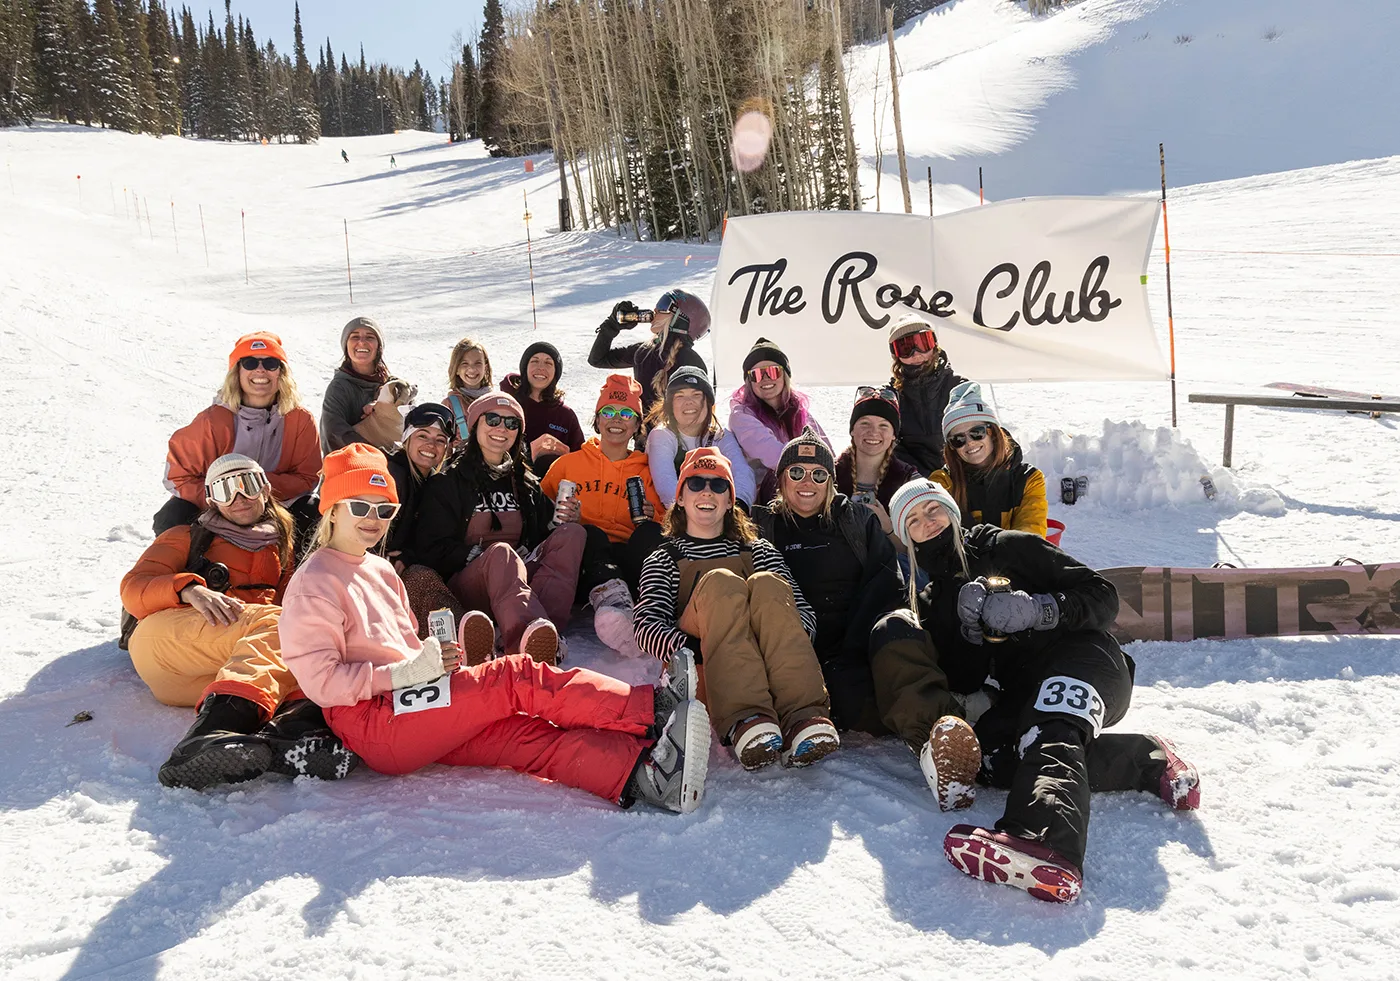 The Rose Club on a snowy mountain